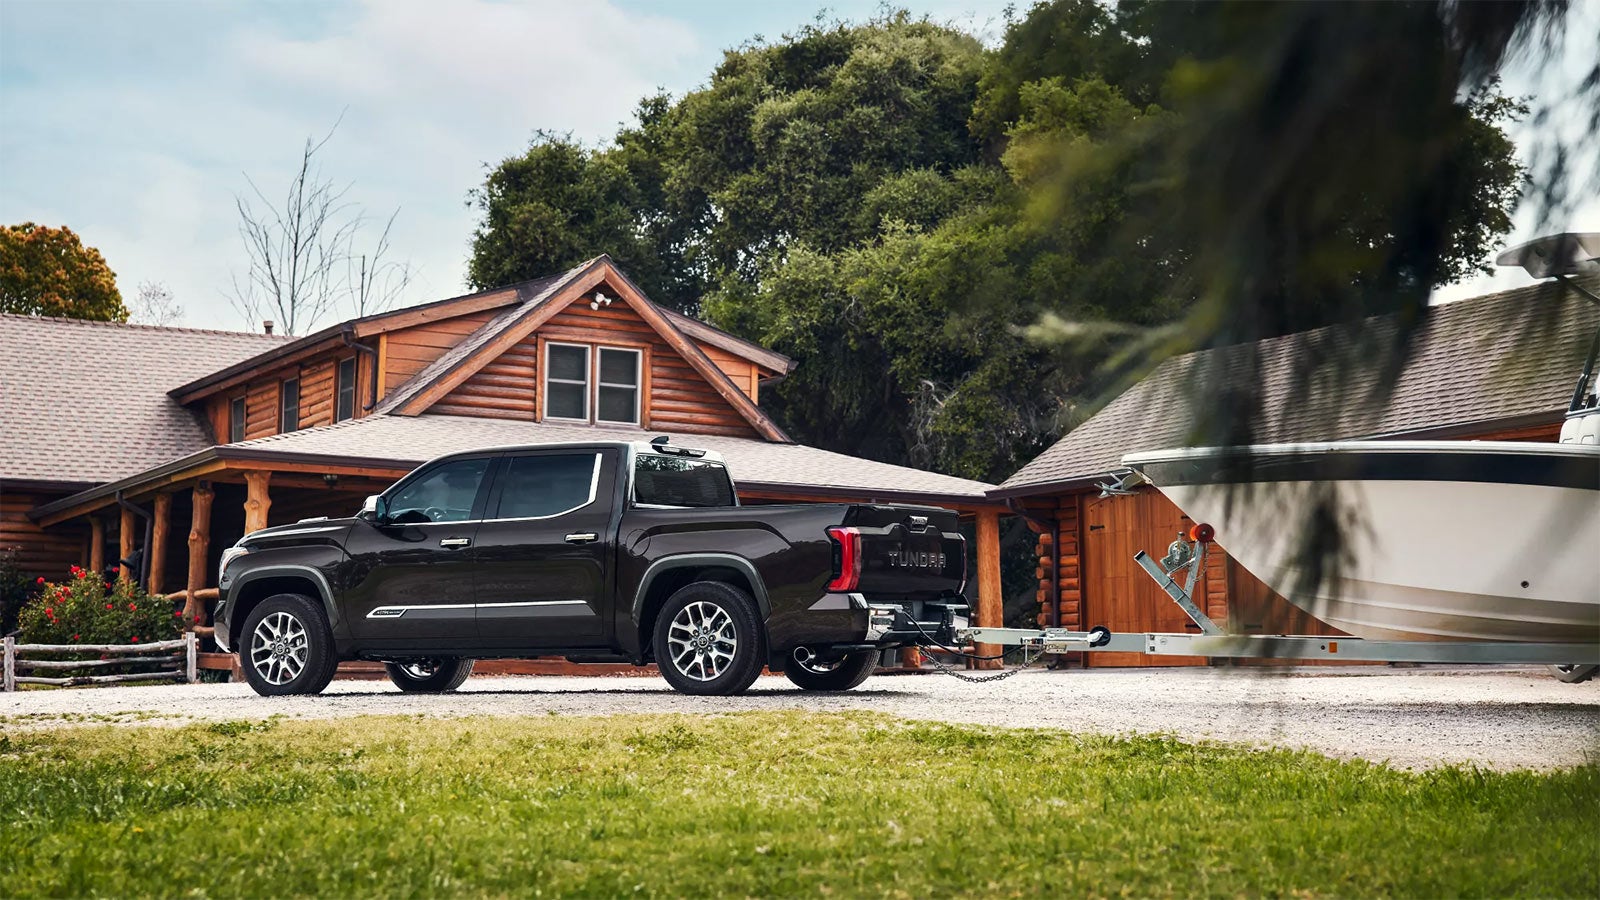 2022 Toyota Tundra Gallery | Family Toyota of Burleson in Burleson TX